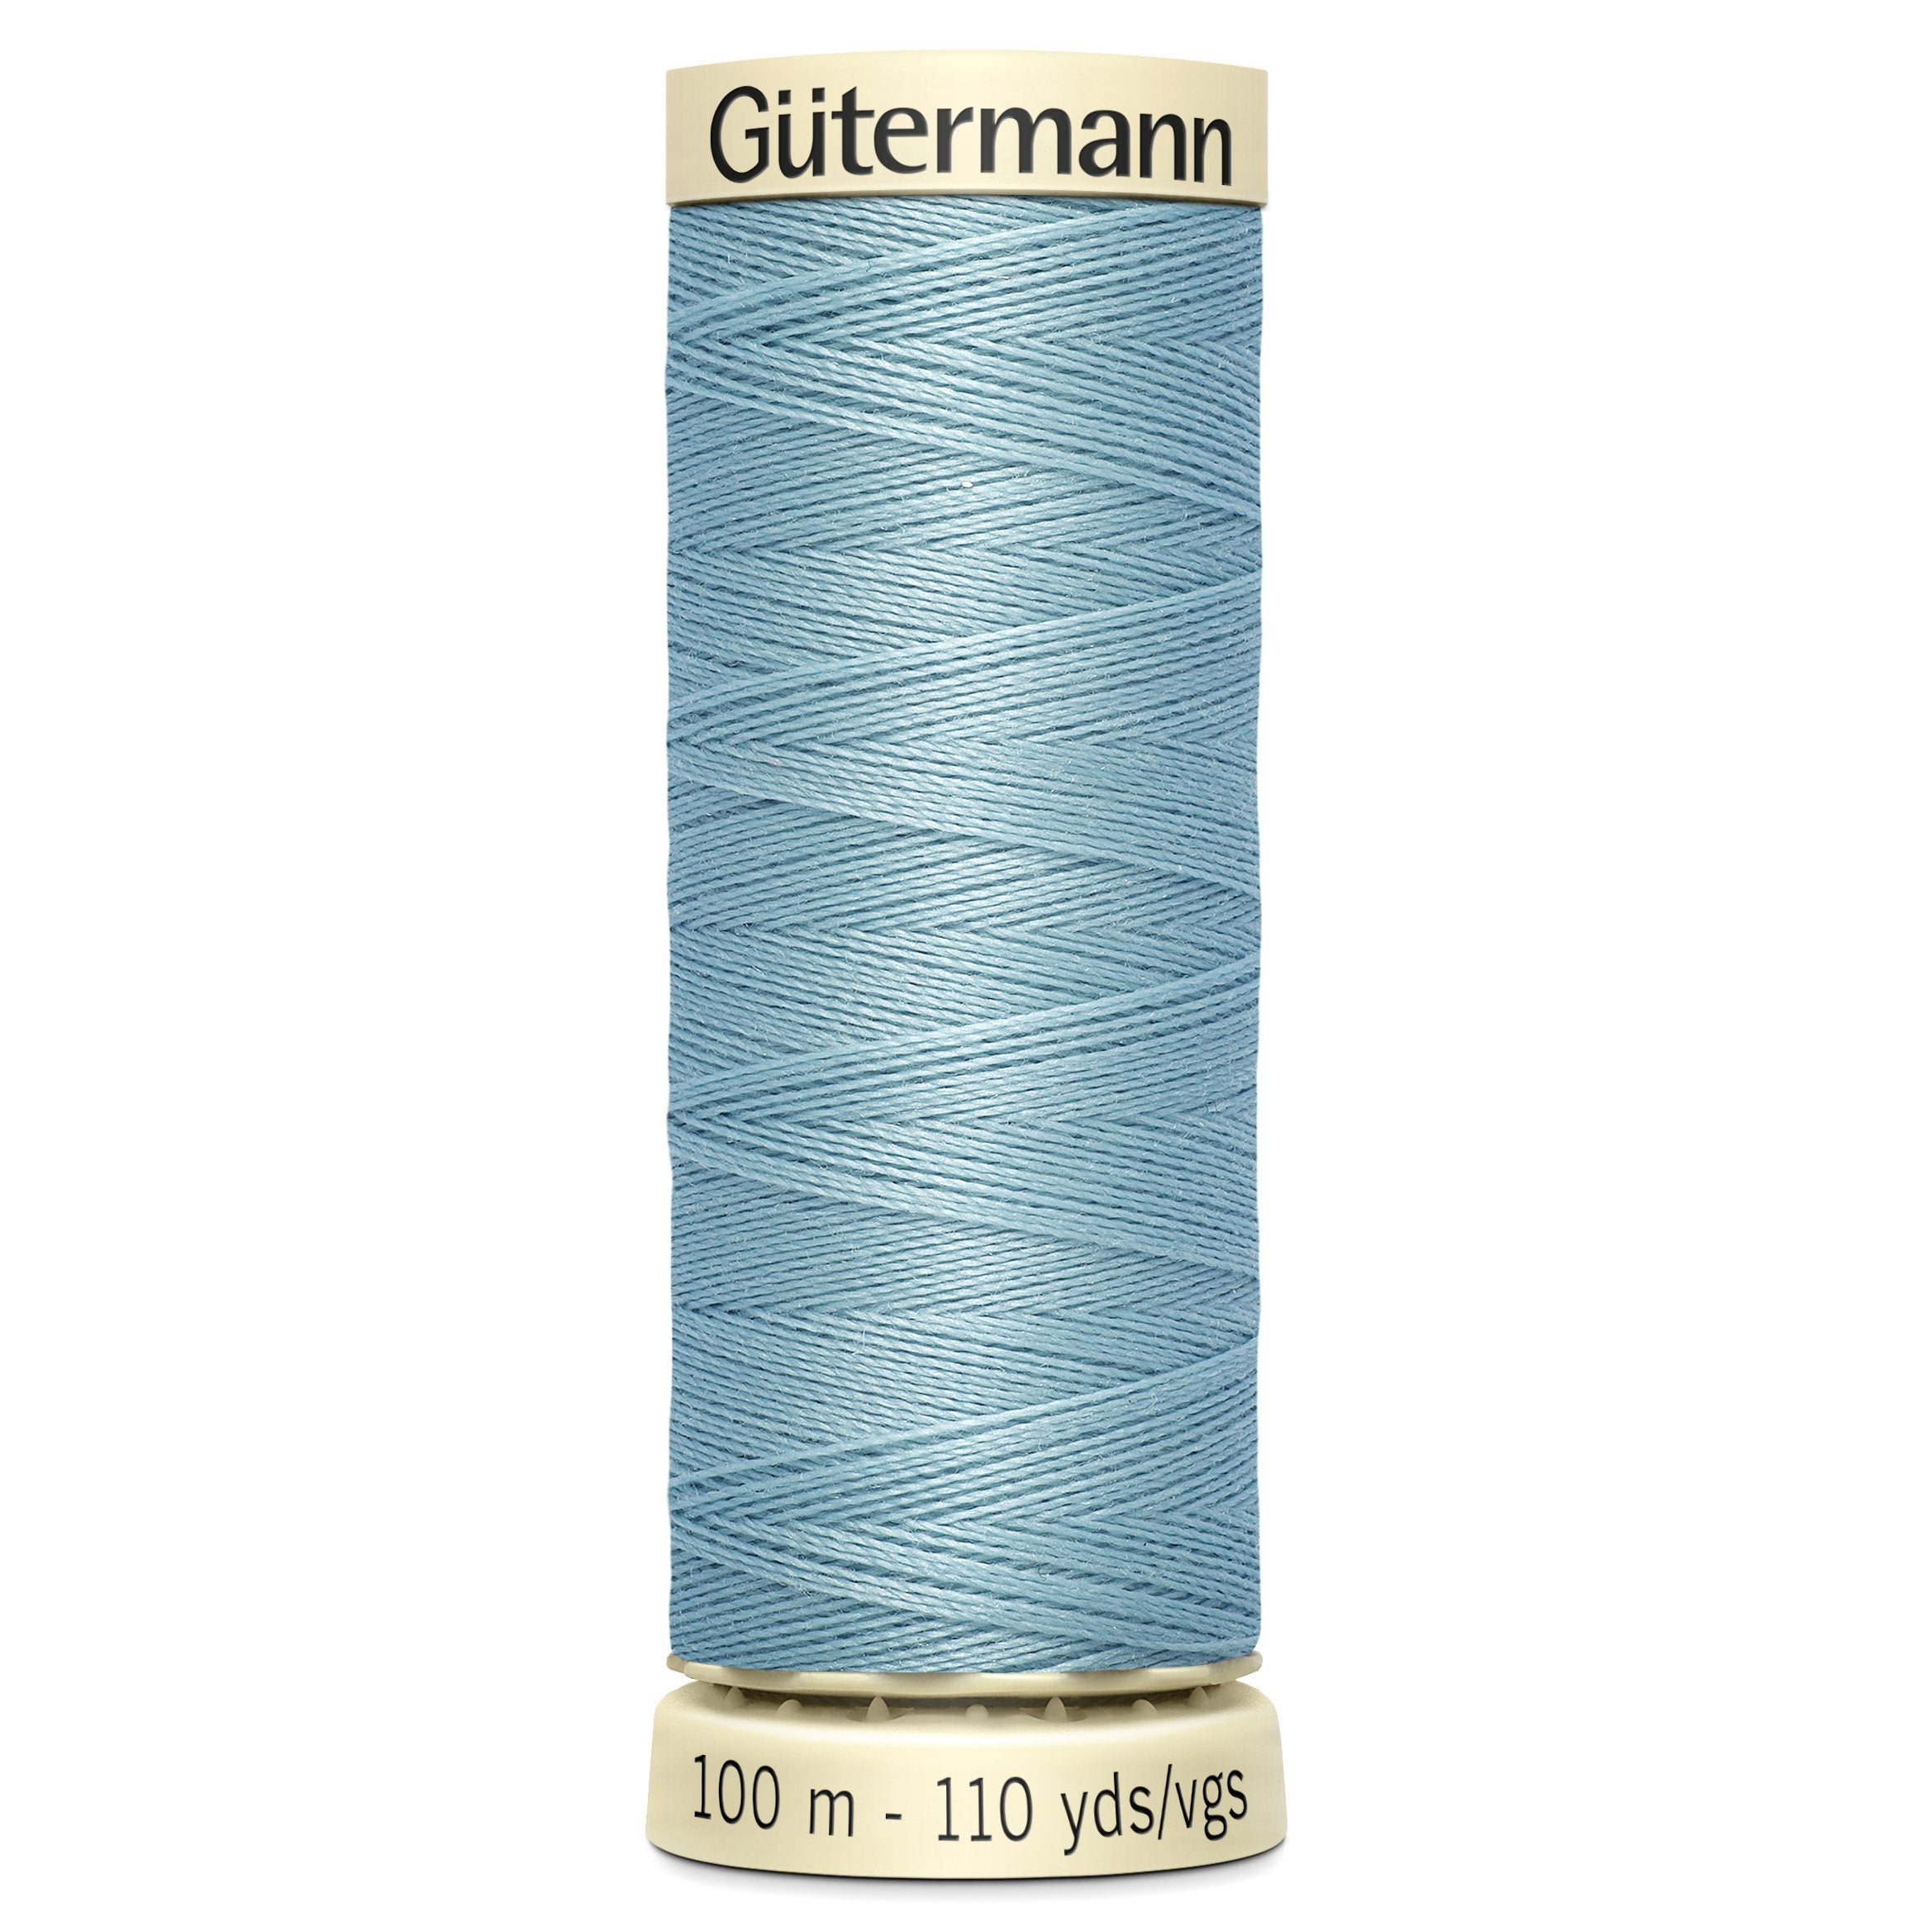 Gutermann Sew All Thread colour 71 Greyish Blue from Jaycotts Sewing Supplies